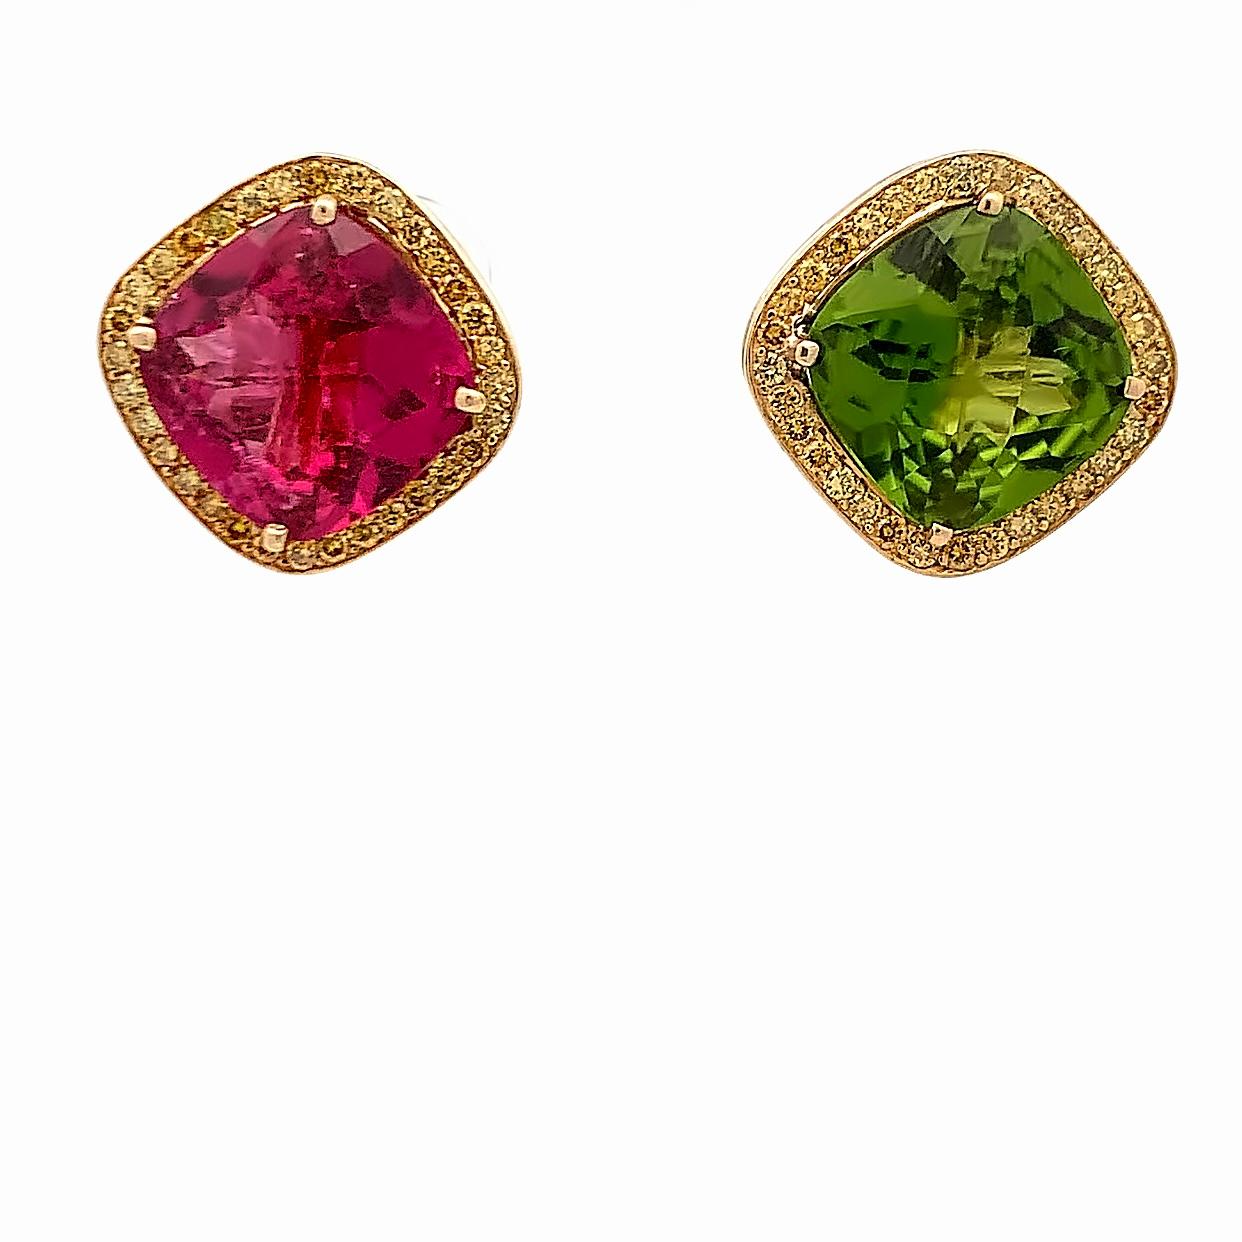 Paolo Costagli Tourmaline, Peridot And Yellow Diamond Earrings.

A pair of earrings by Paolo Costagli, featuring faceted a pink tourmaline and peridot, complemented by a halo of round brilliant cut yellow diamonds.

Measurements: .60